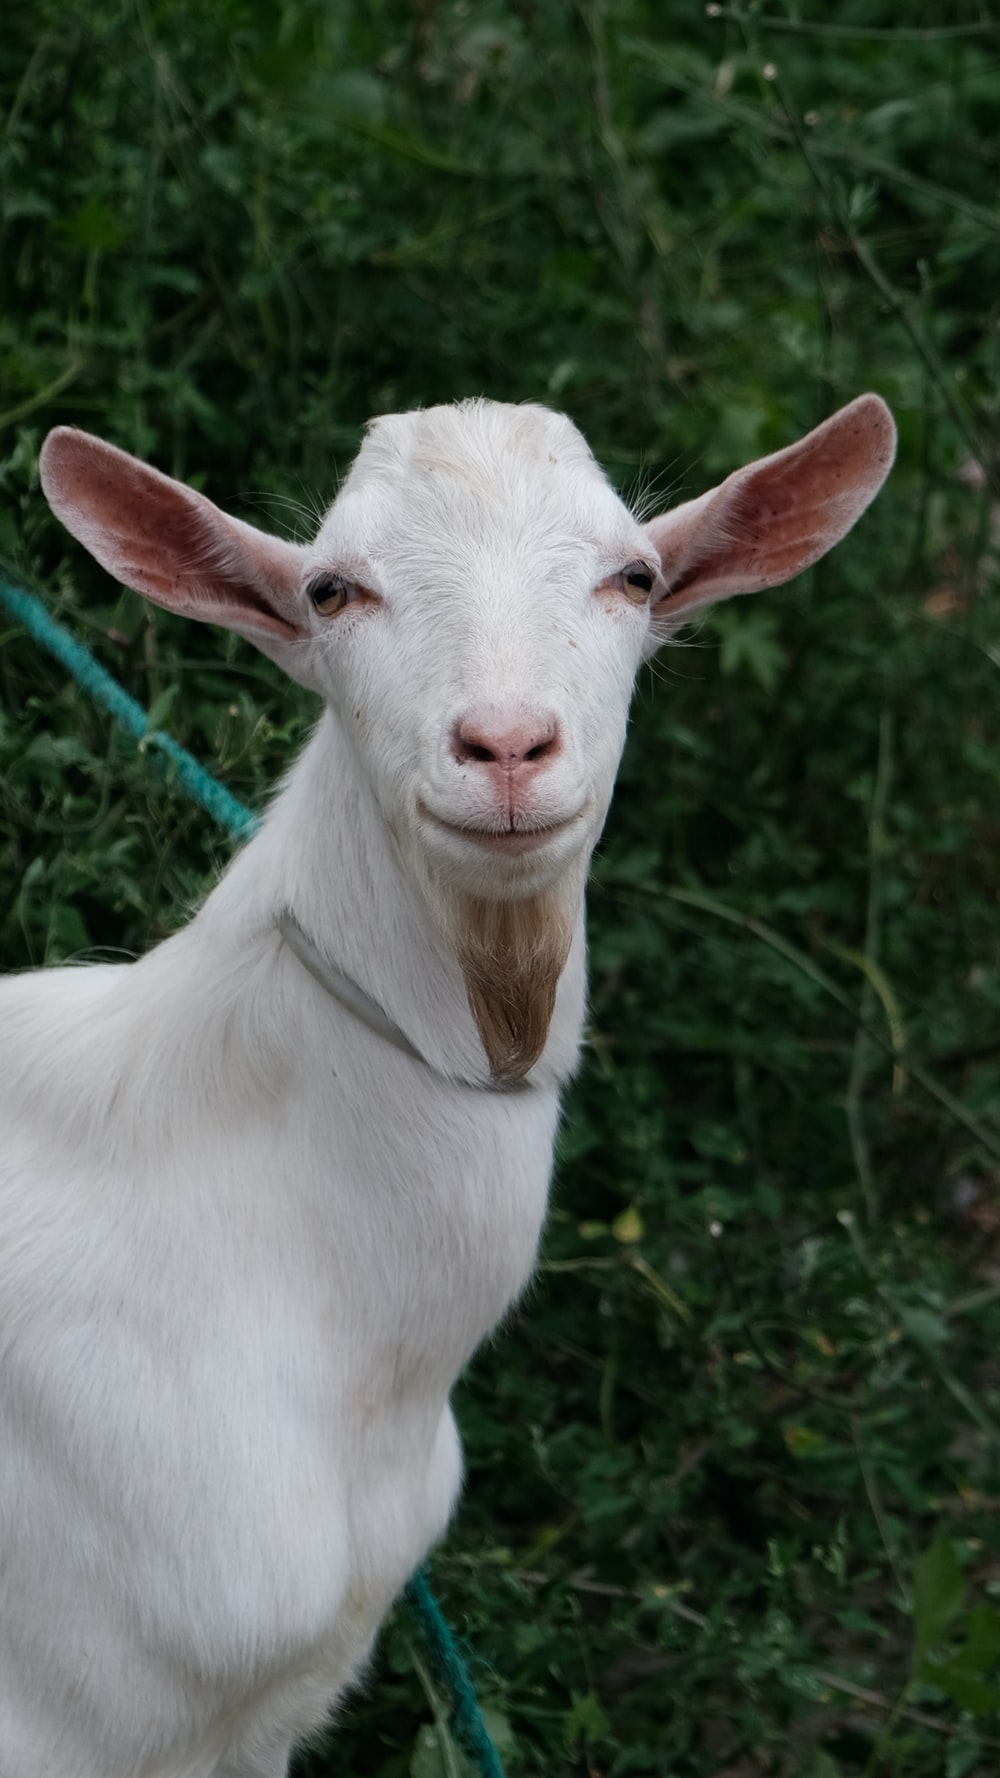 Funny Goat Picture. Download Free Image